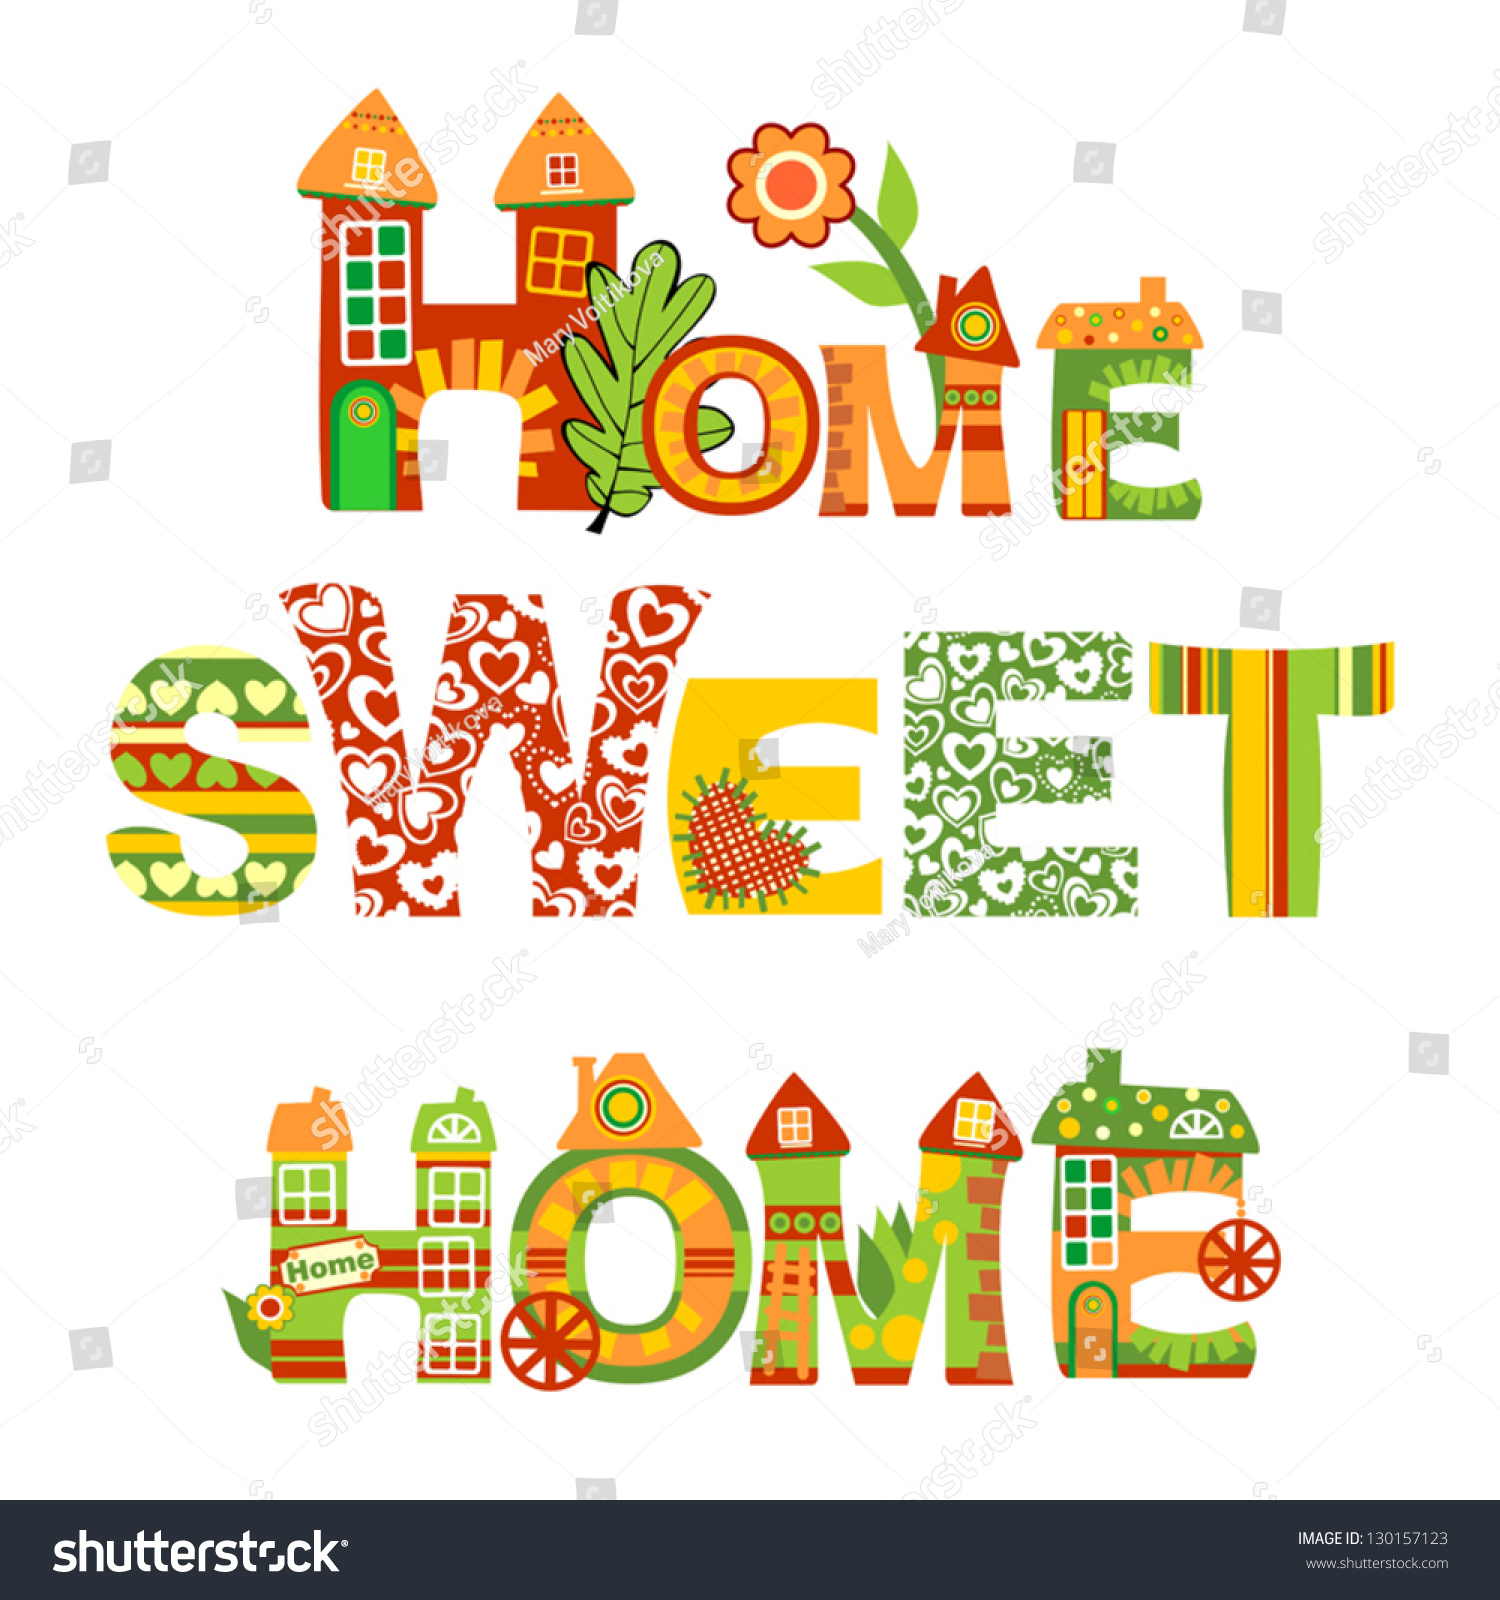 new home clipart images - photo #27